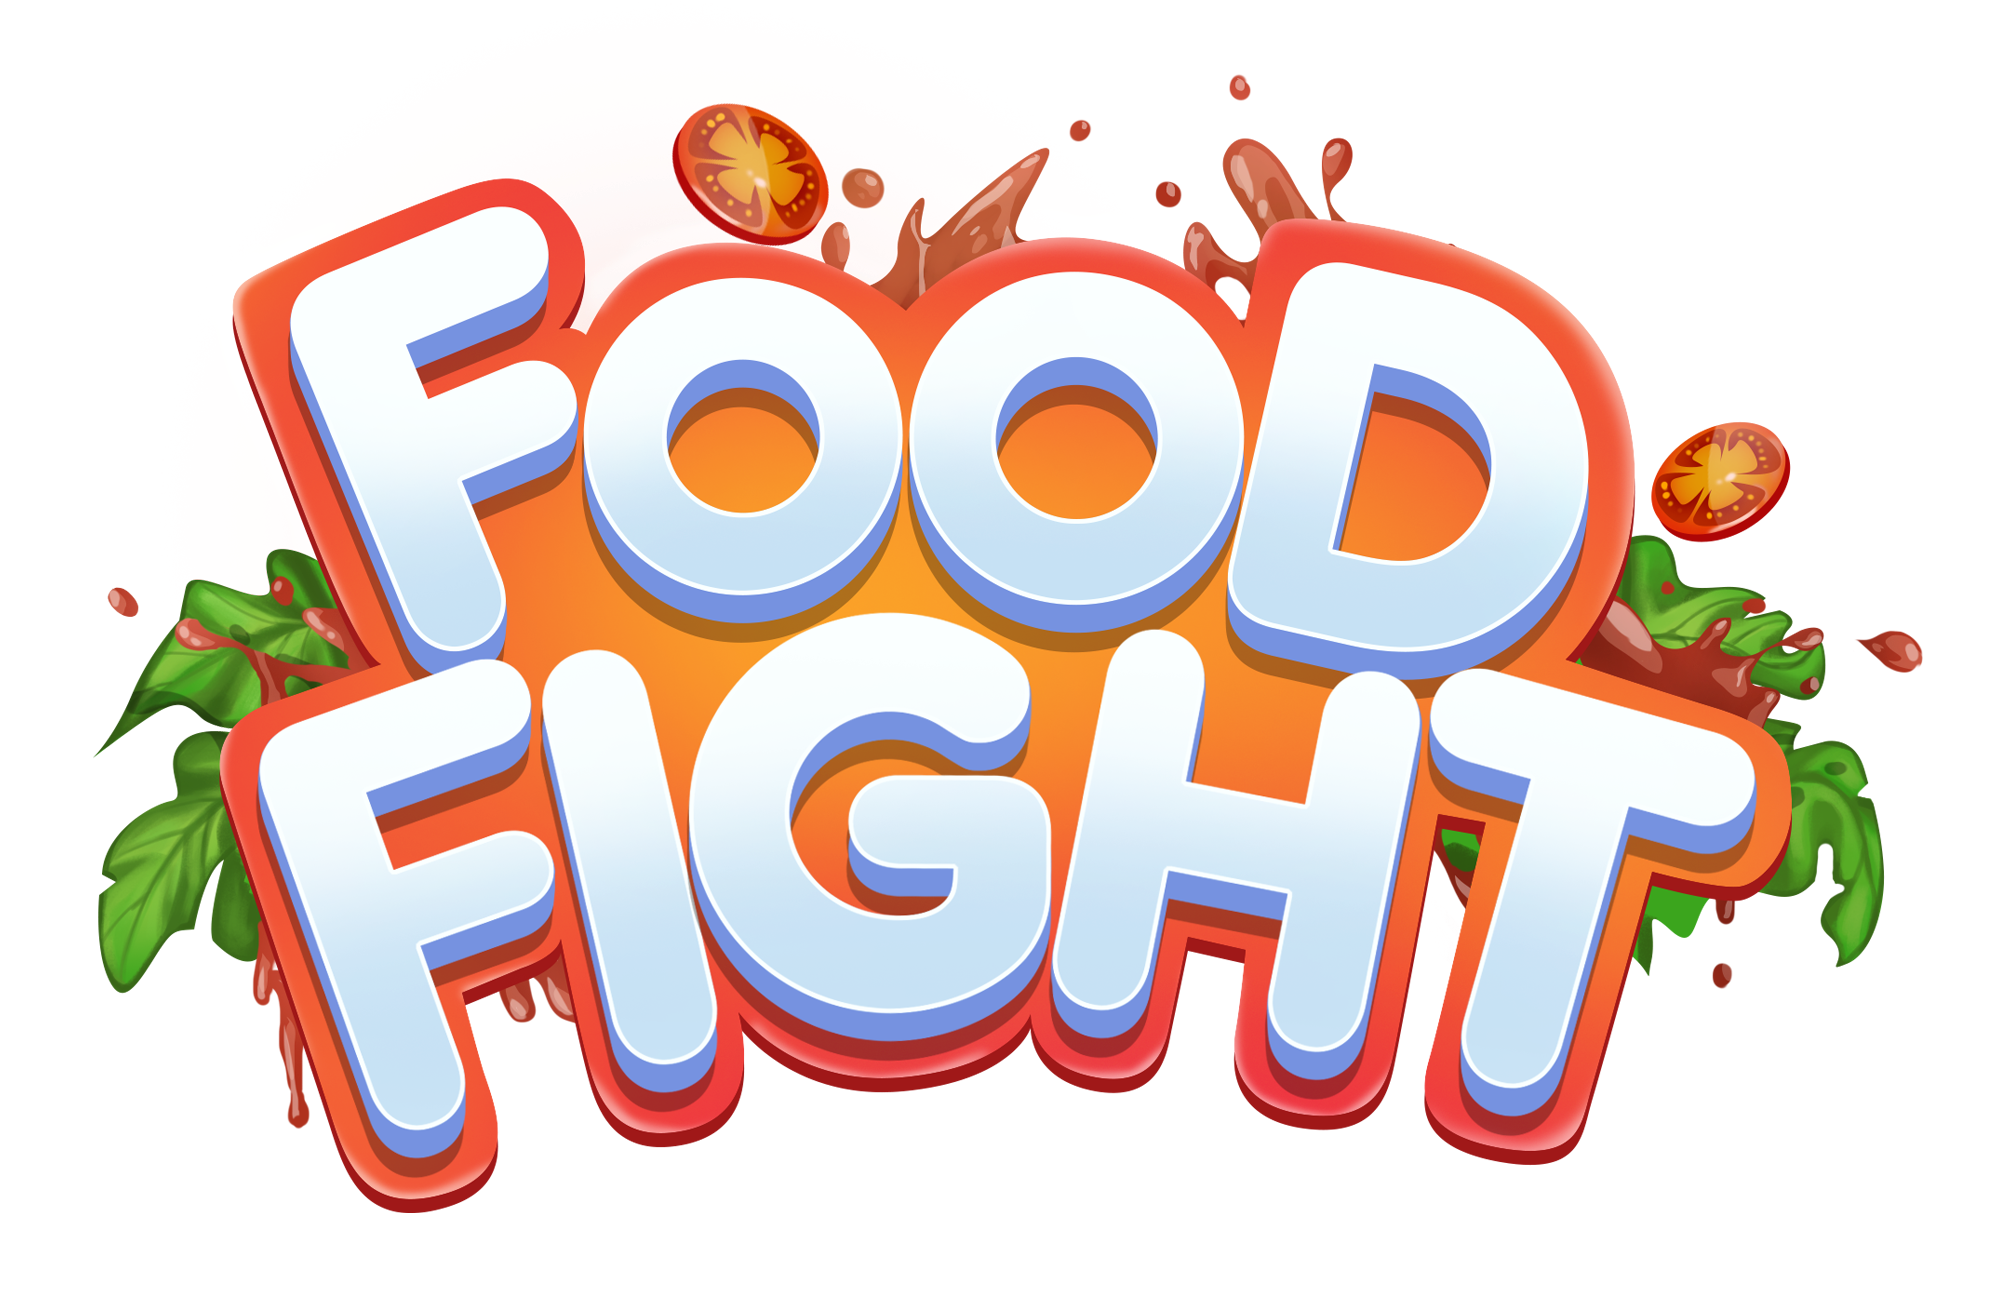 Press Release Template - Sample Food Fight Image